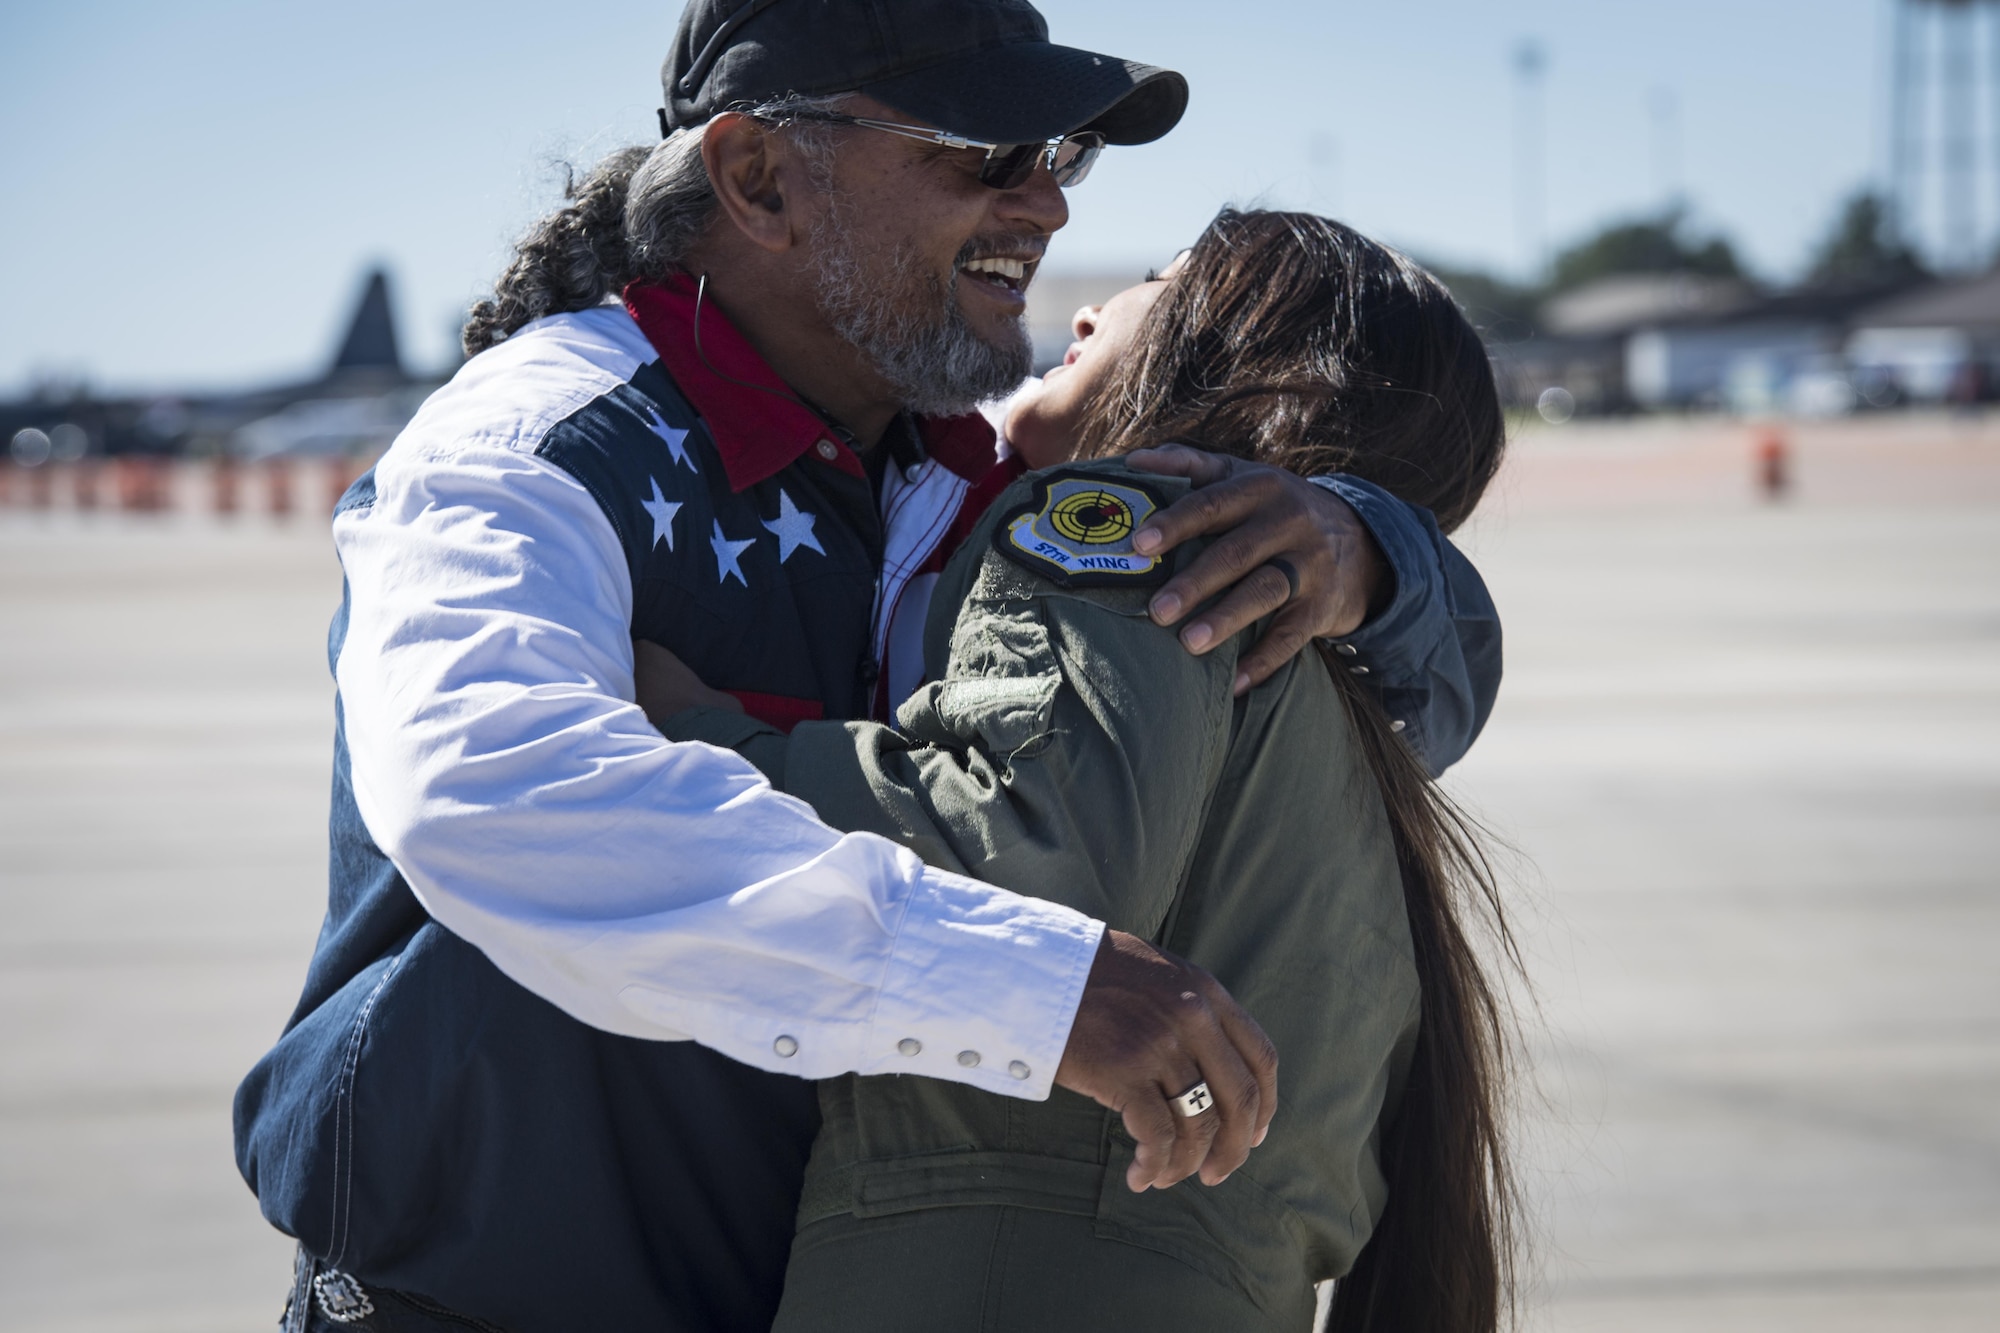 Noelani Mathews, multimedia journalist, hugs her father Ret. Tech. Sgt. Lawrence Mathews, before her media flight in an F-16D Fighting Falcon, Oct. 27, 2017, at Moody Air Force Base, Ga. The U.S. Air Force Thunderbirds, based out of Nellis Air Force Base, Nev., are the Air Force’s premier aerial demonstration team, performing at air shows and special events worldwide. (U.S. Air Force photo by Senior Airman Janiqua P. Robinson)